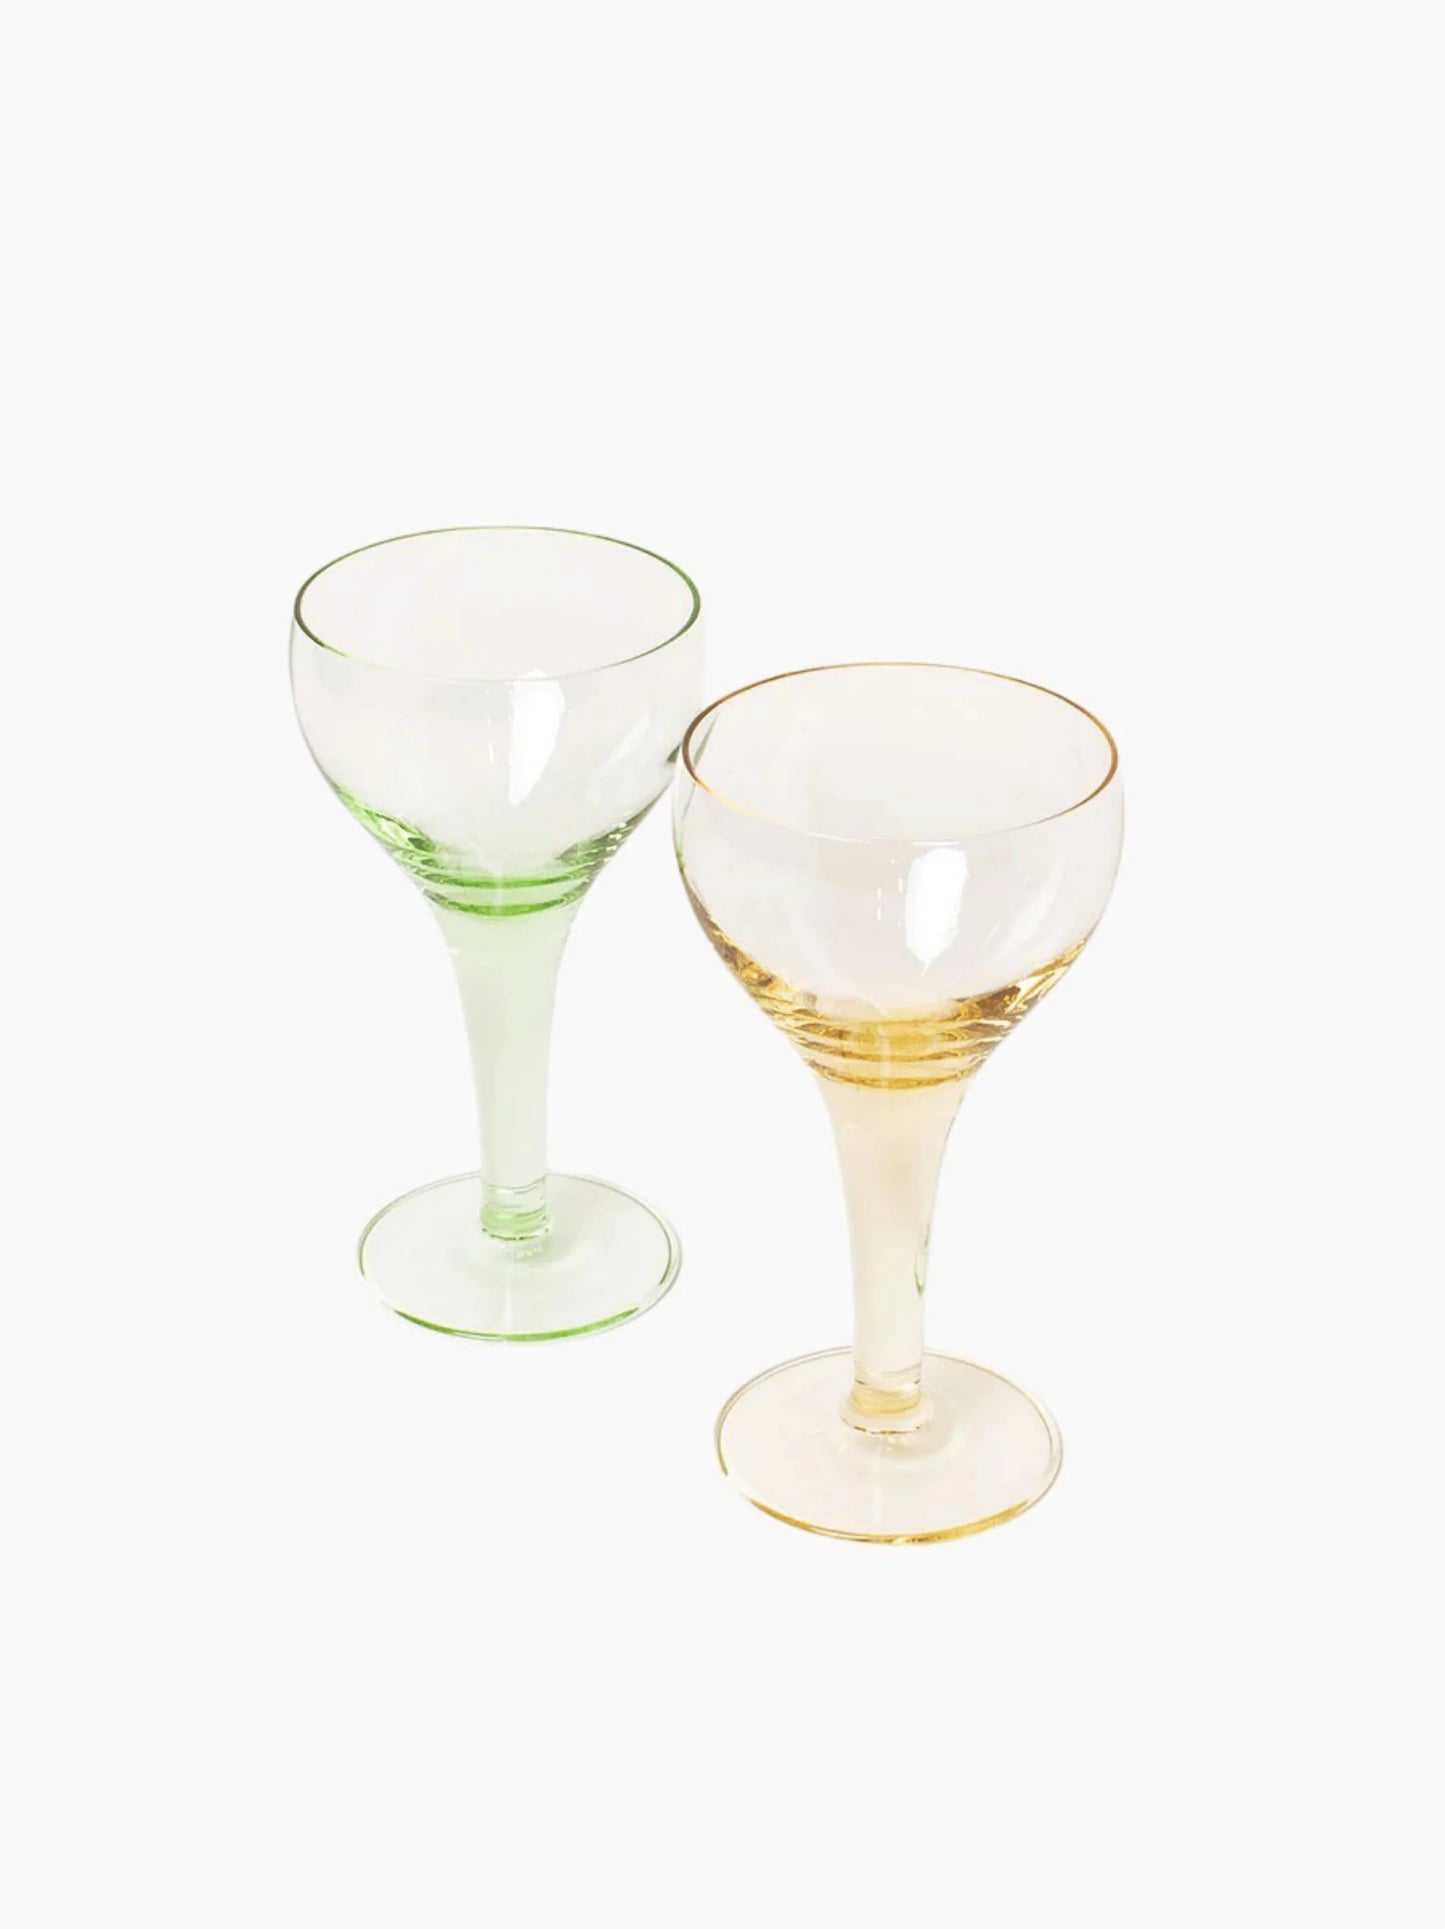 Green & Yellow Cocktail Glasses Set of 2